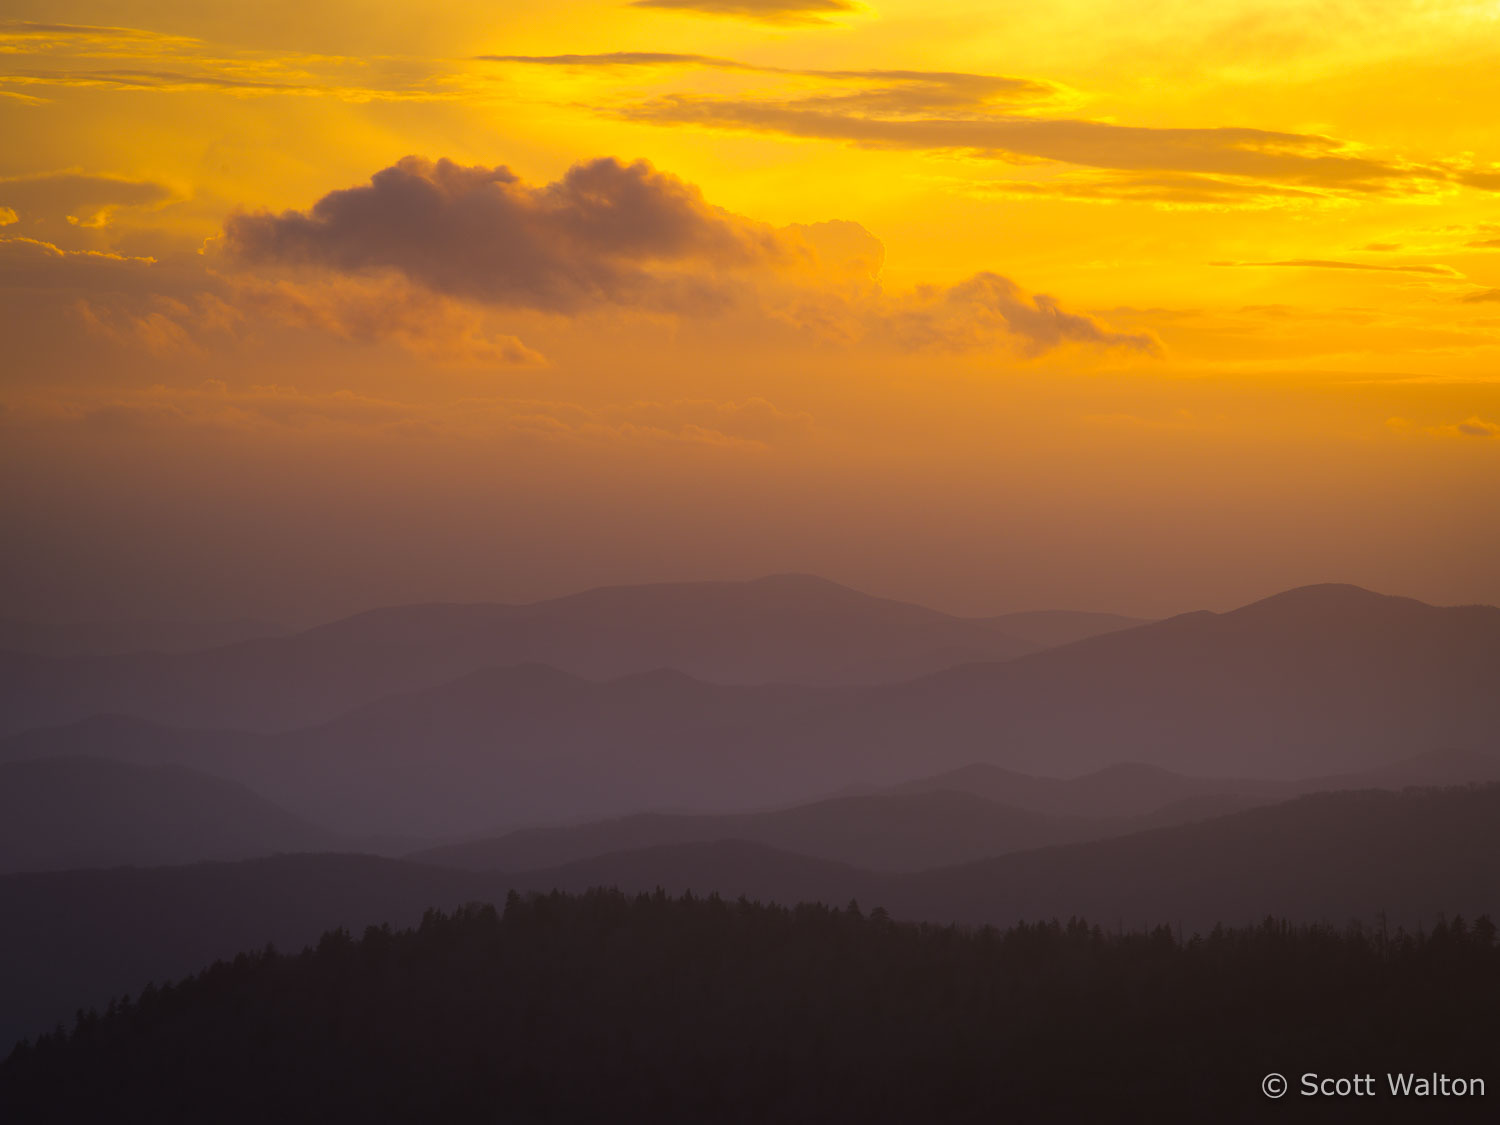 sunset-clingmans-dome-great-smoky-mountains-national-park-tennessee.jpg